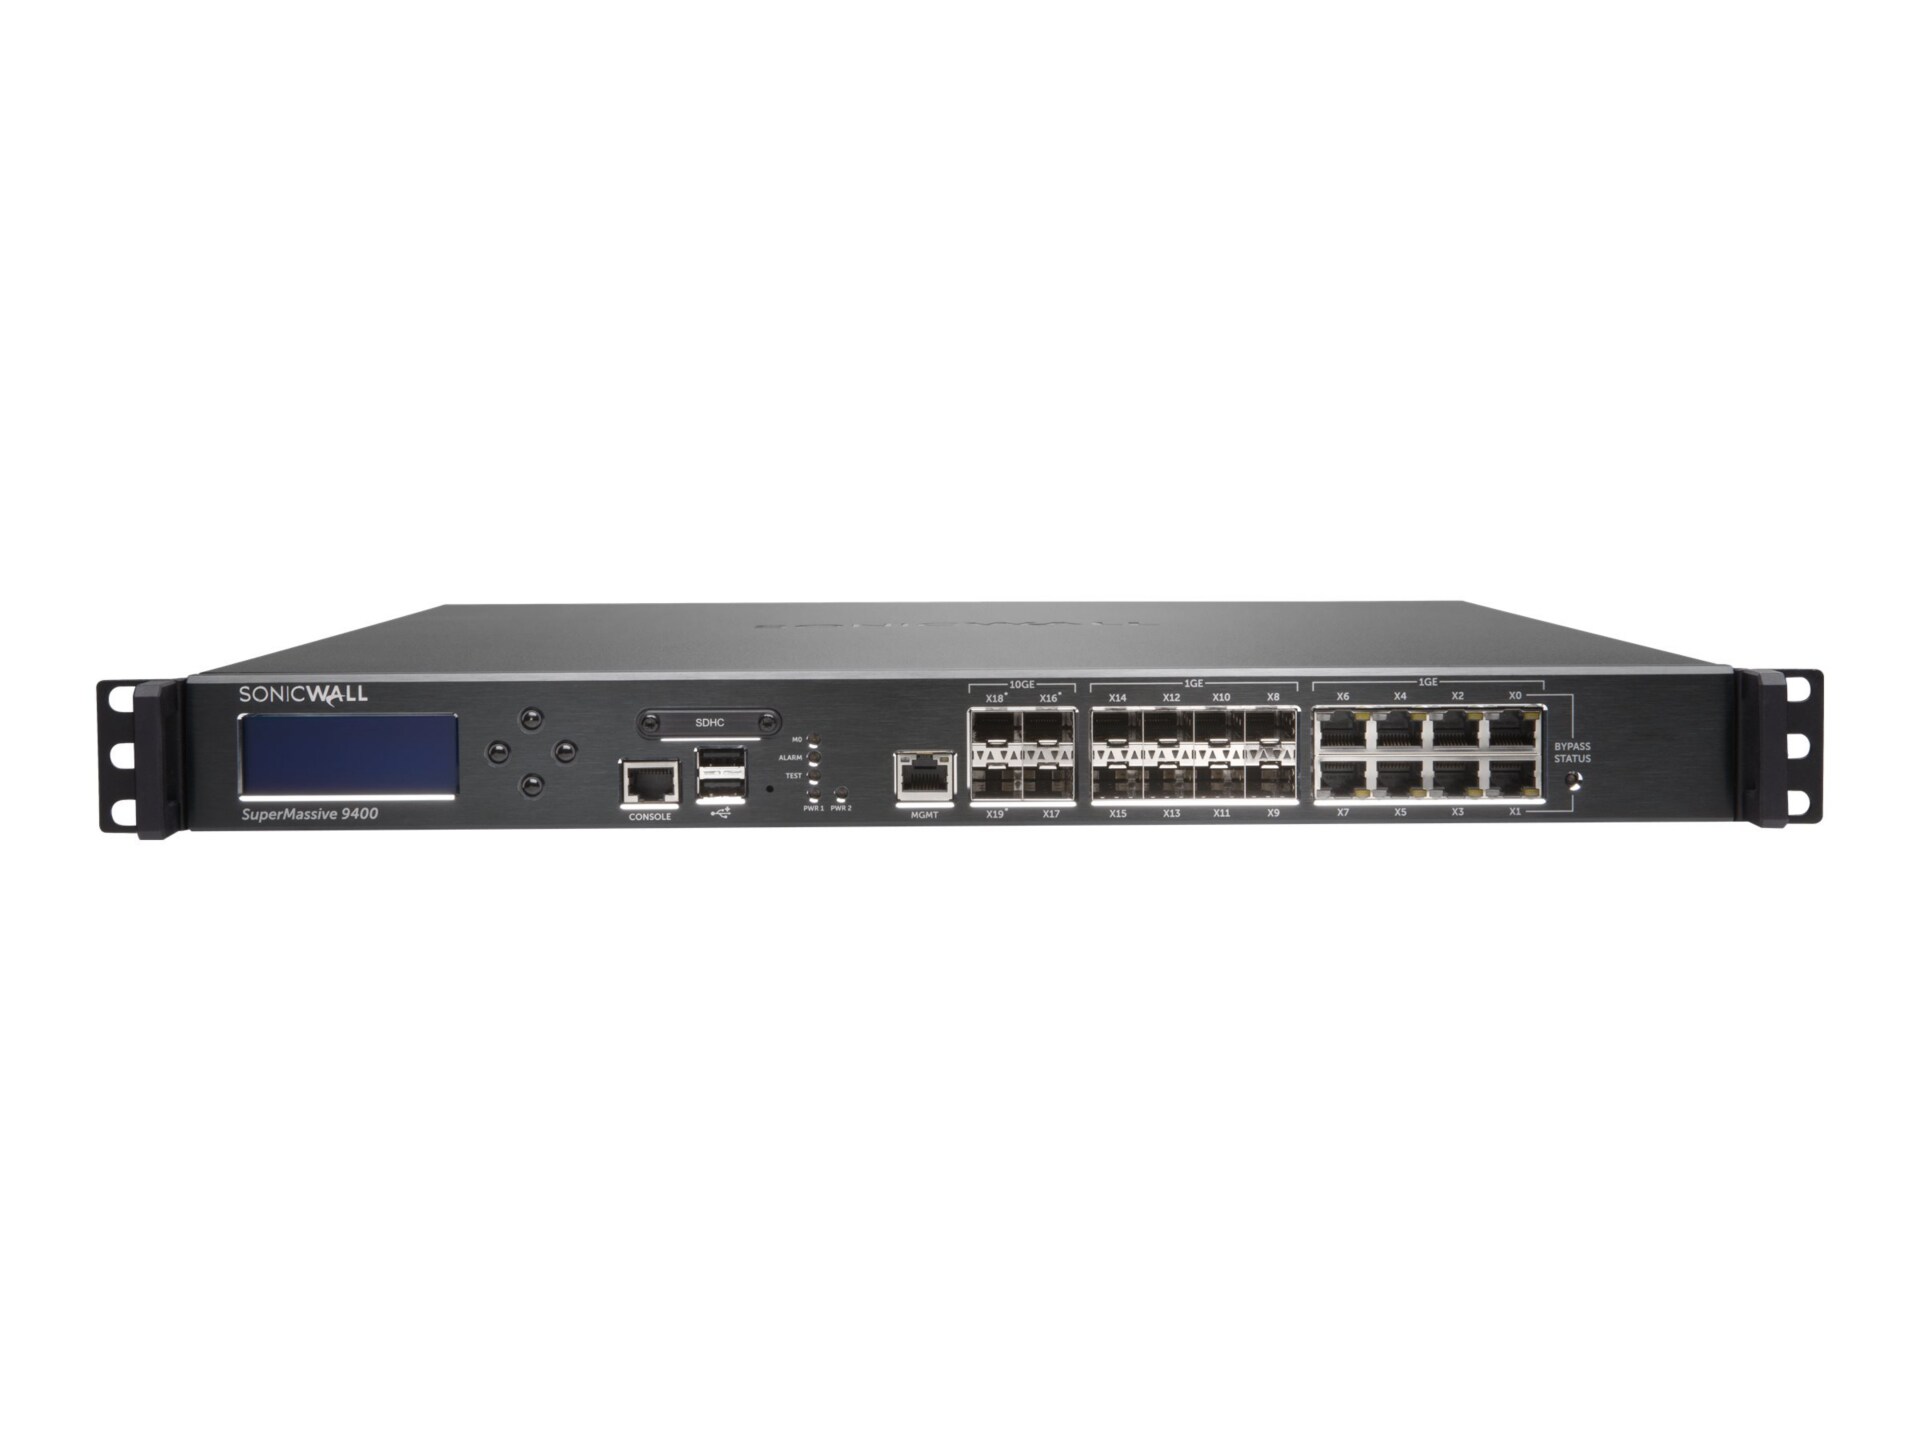 Sonicwall SuperMassive 9400 - security appliance